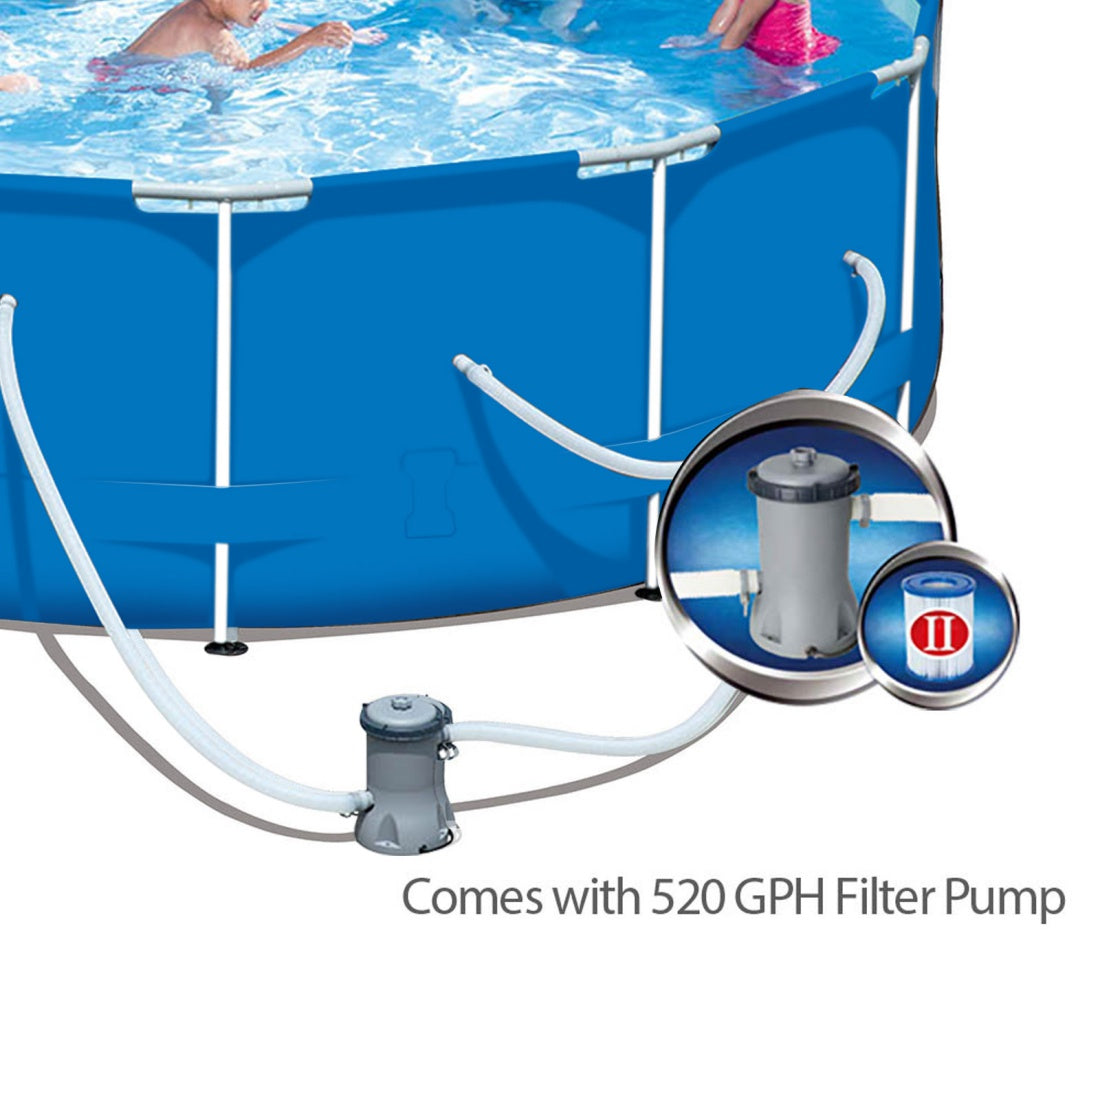 NEW BESTWAY ABOVE GROUND SWIMMING POOL Steel Frame Filter Pump 12ft 366cm 56419